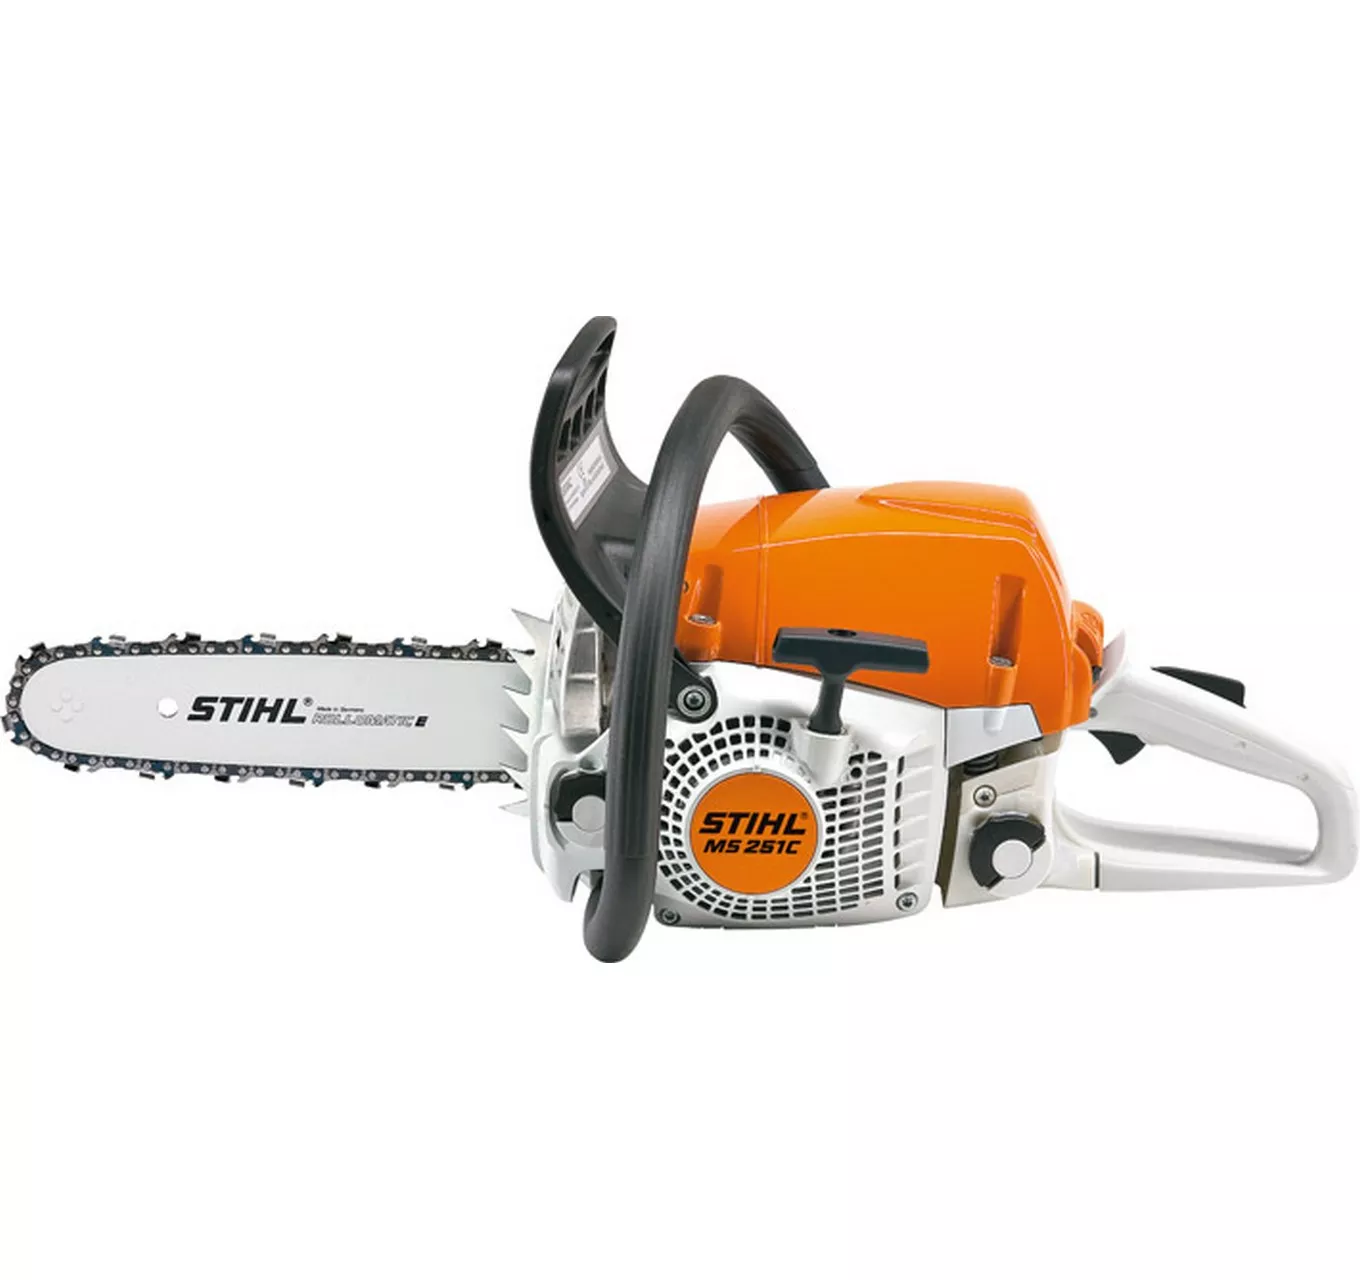 MS 251 C-BE Chainsaw 18"